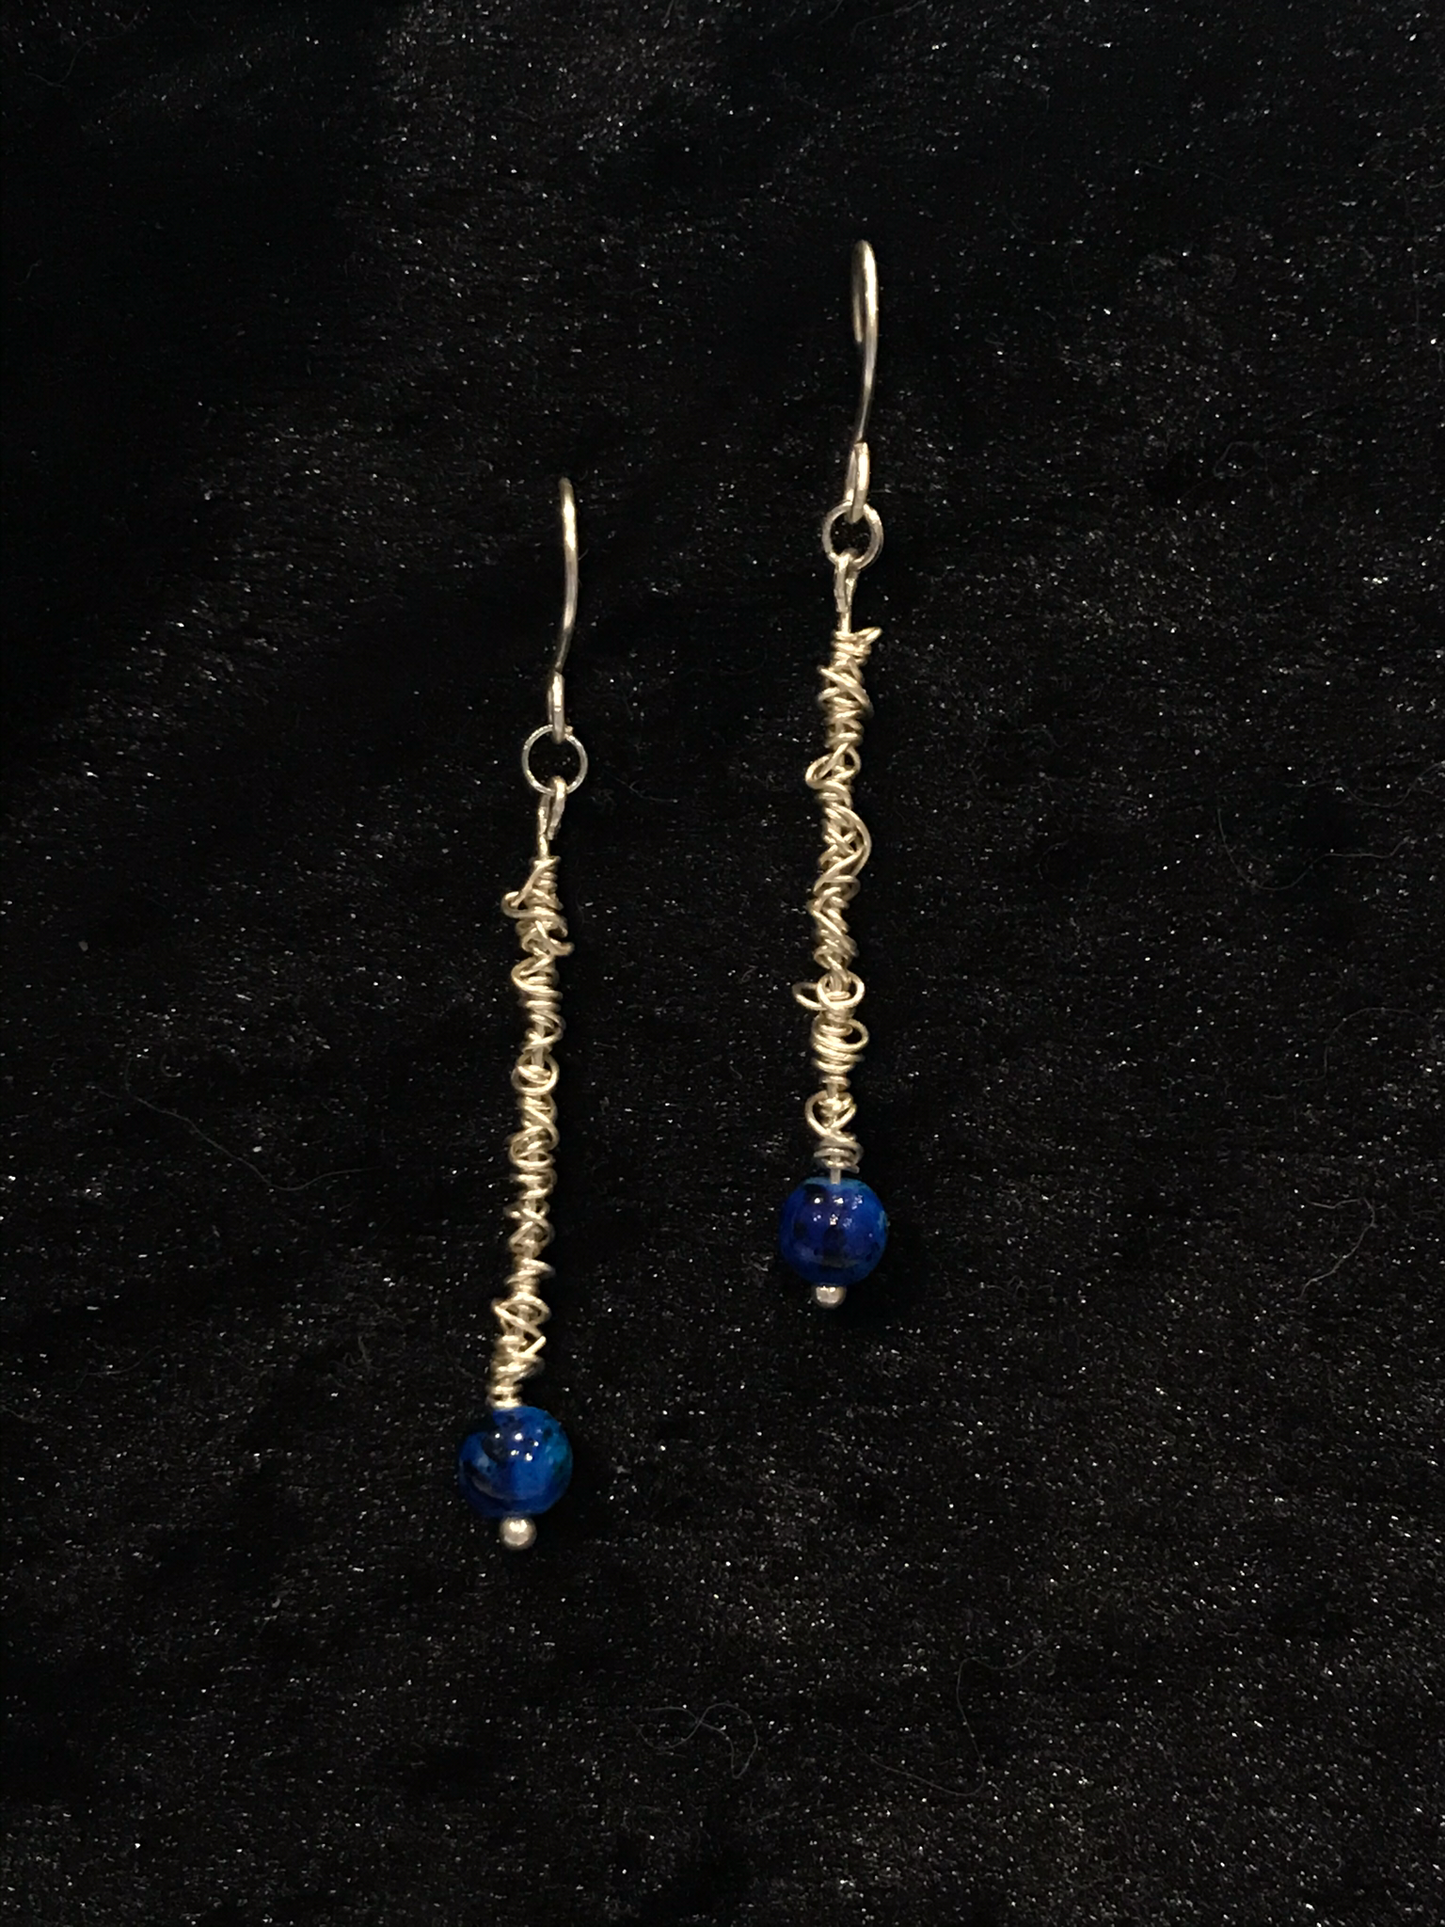 Wire & small blue bead earrings with silver twist detail